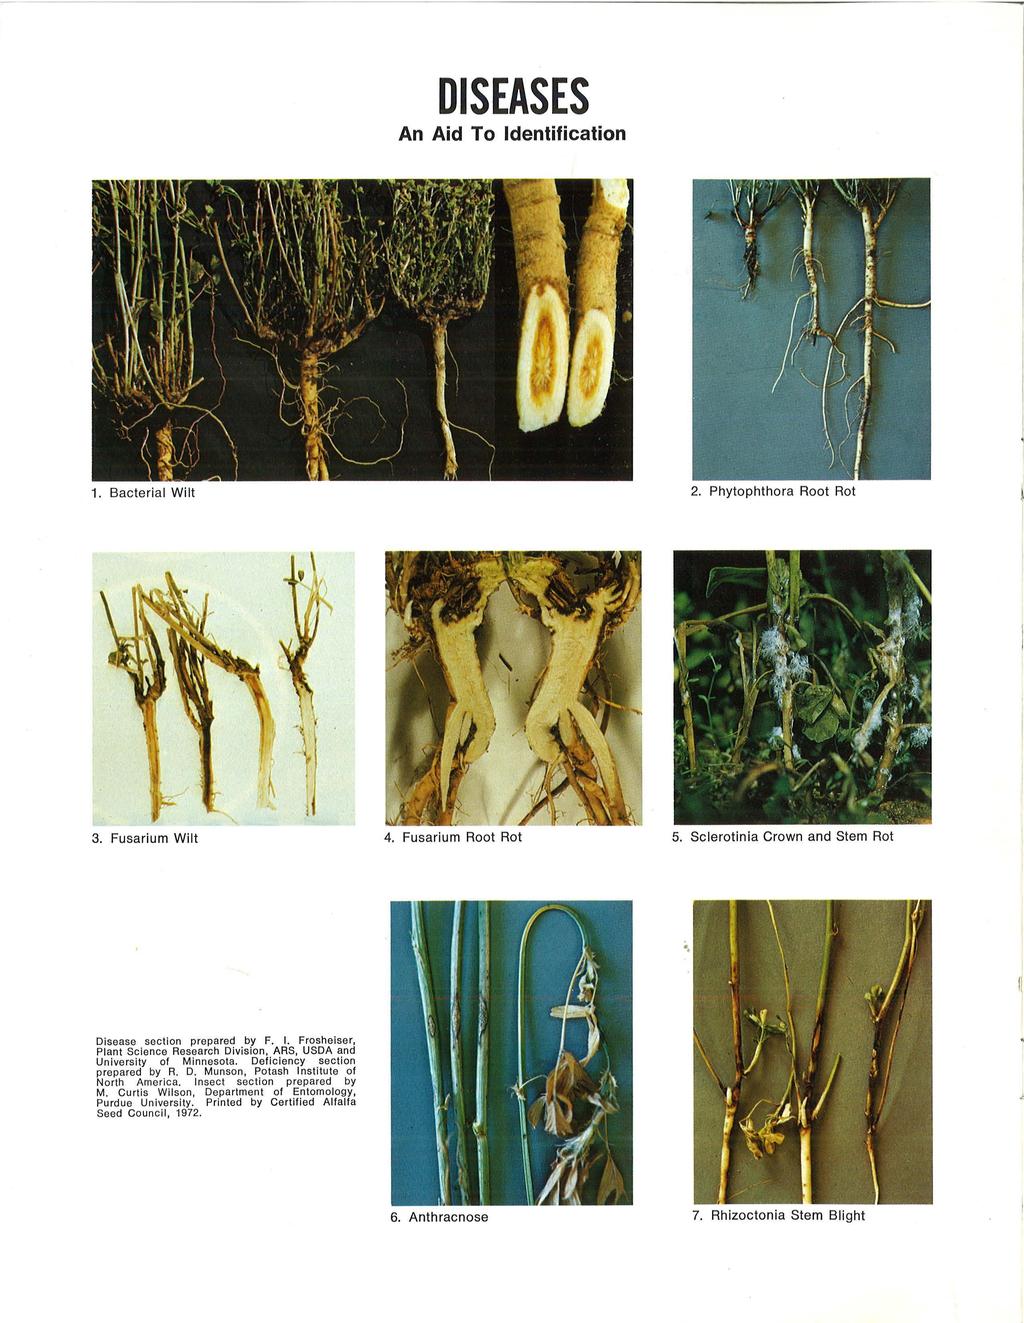 DISEASES An Aid To Identification 1. Bacterial Wilt 2. Phytophthora Root Rot 3. Fusarium Wilt 4. Fusarium Root Rot 5. Sclerotinia Crown and Stem Rot. Disease secti on prepared by F. I. Frosheiser, Plant Sc ience Research Division, ARS, USDA and University of Minnesota.